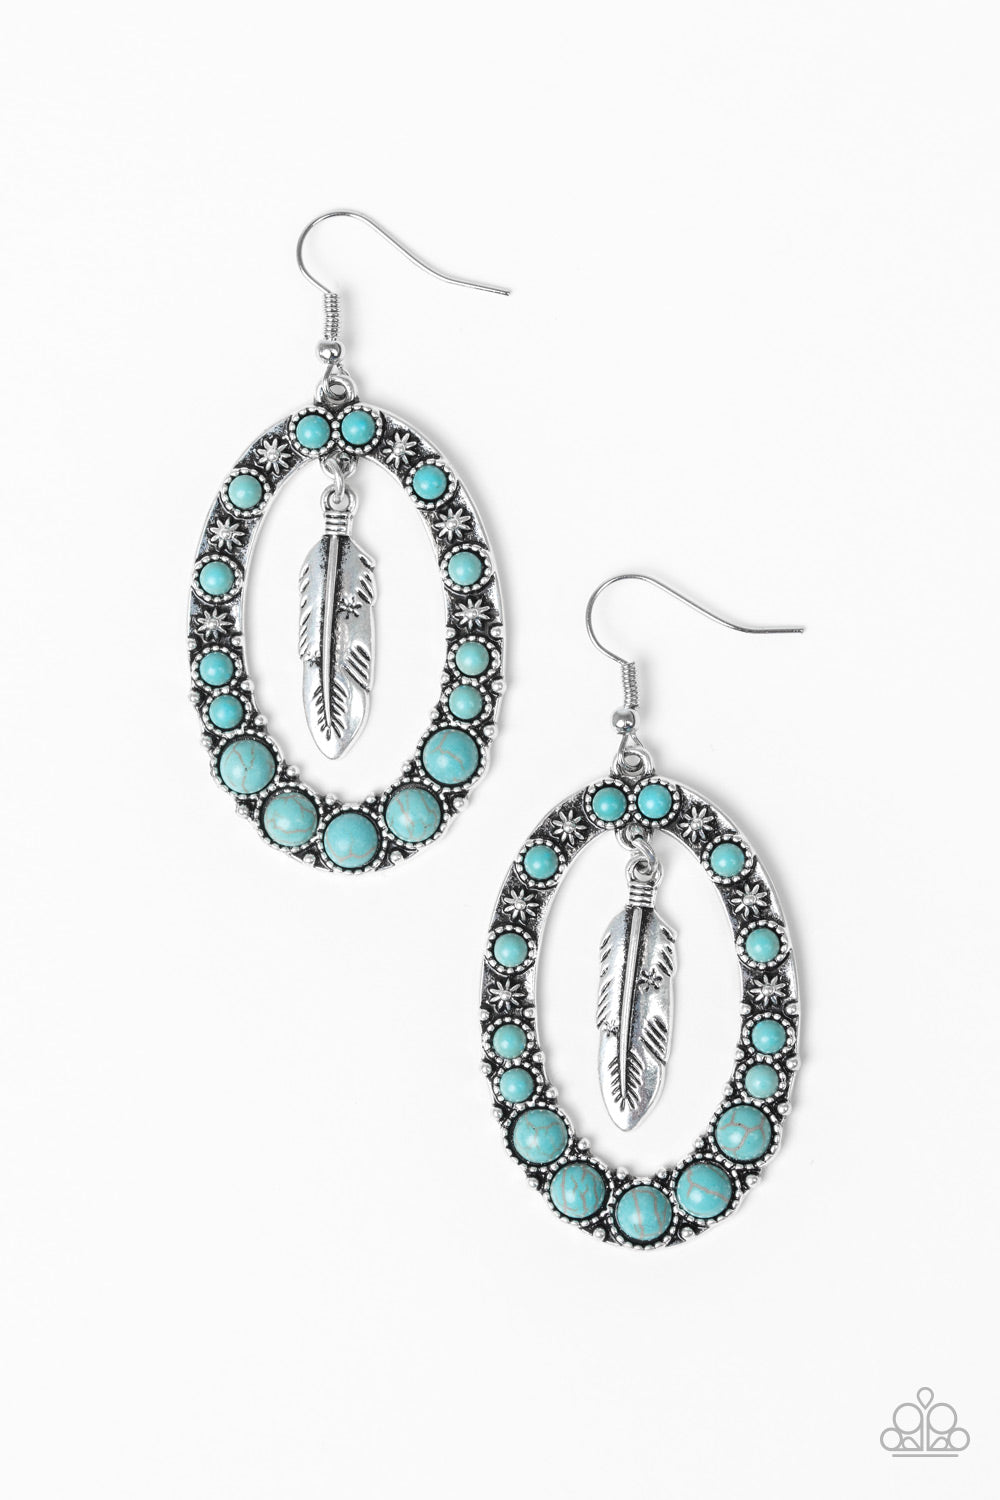 PUT UP A FLIGHT - BLUE TURQUOISE ENCRUSTED SILVER OVAL FLOATING FEATHER EARRINGS